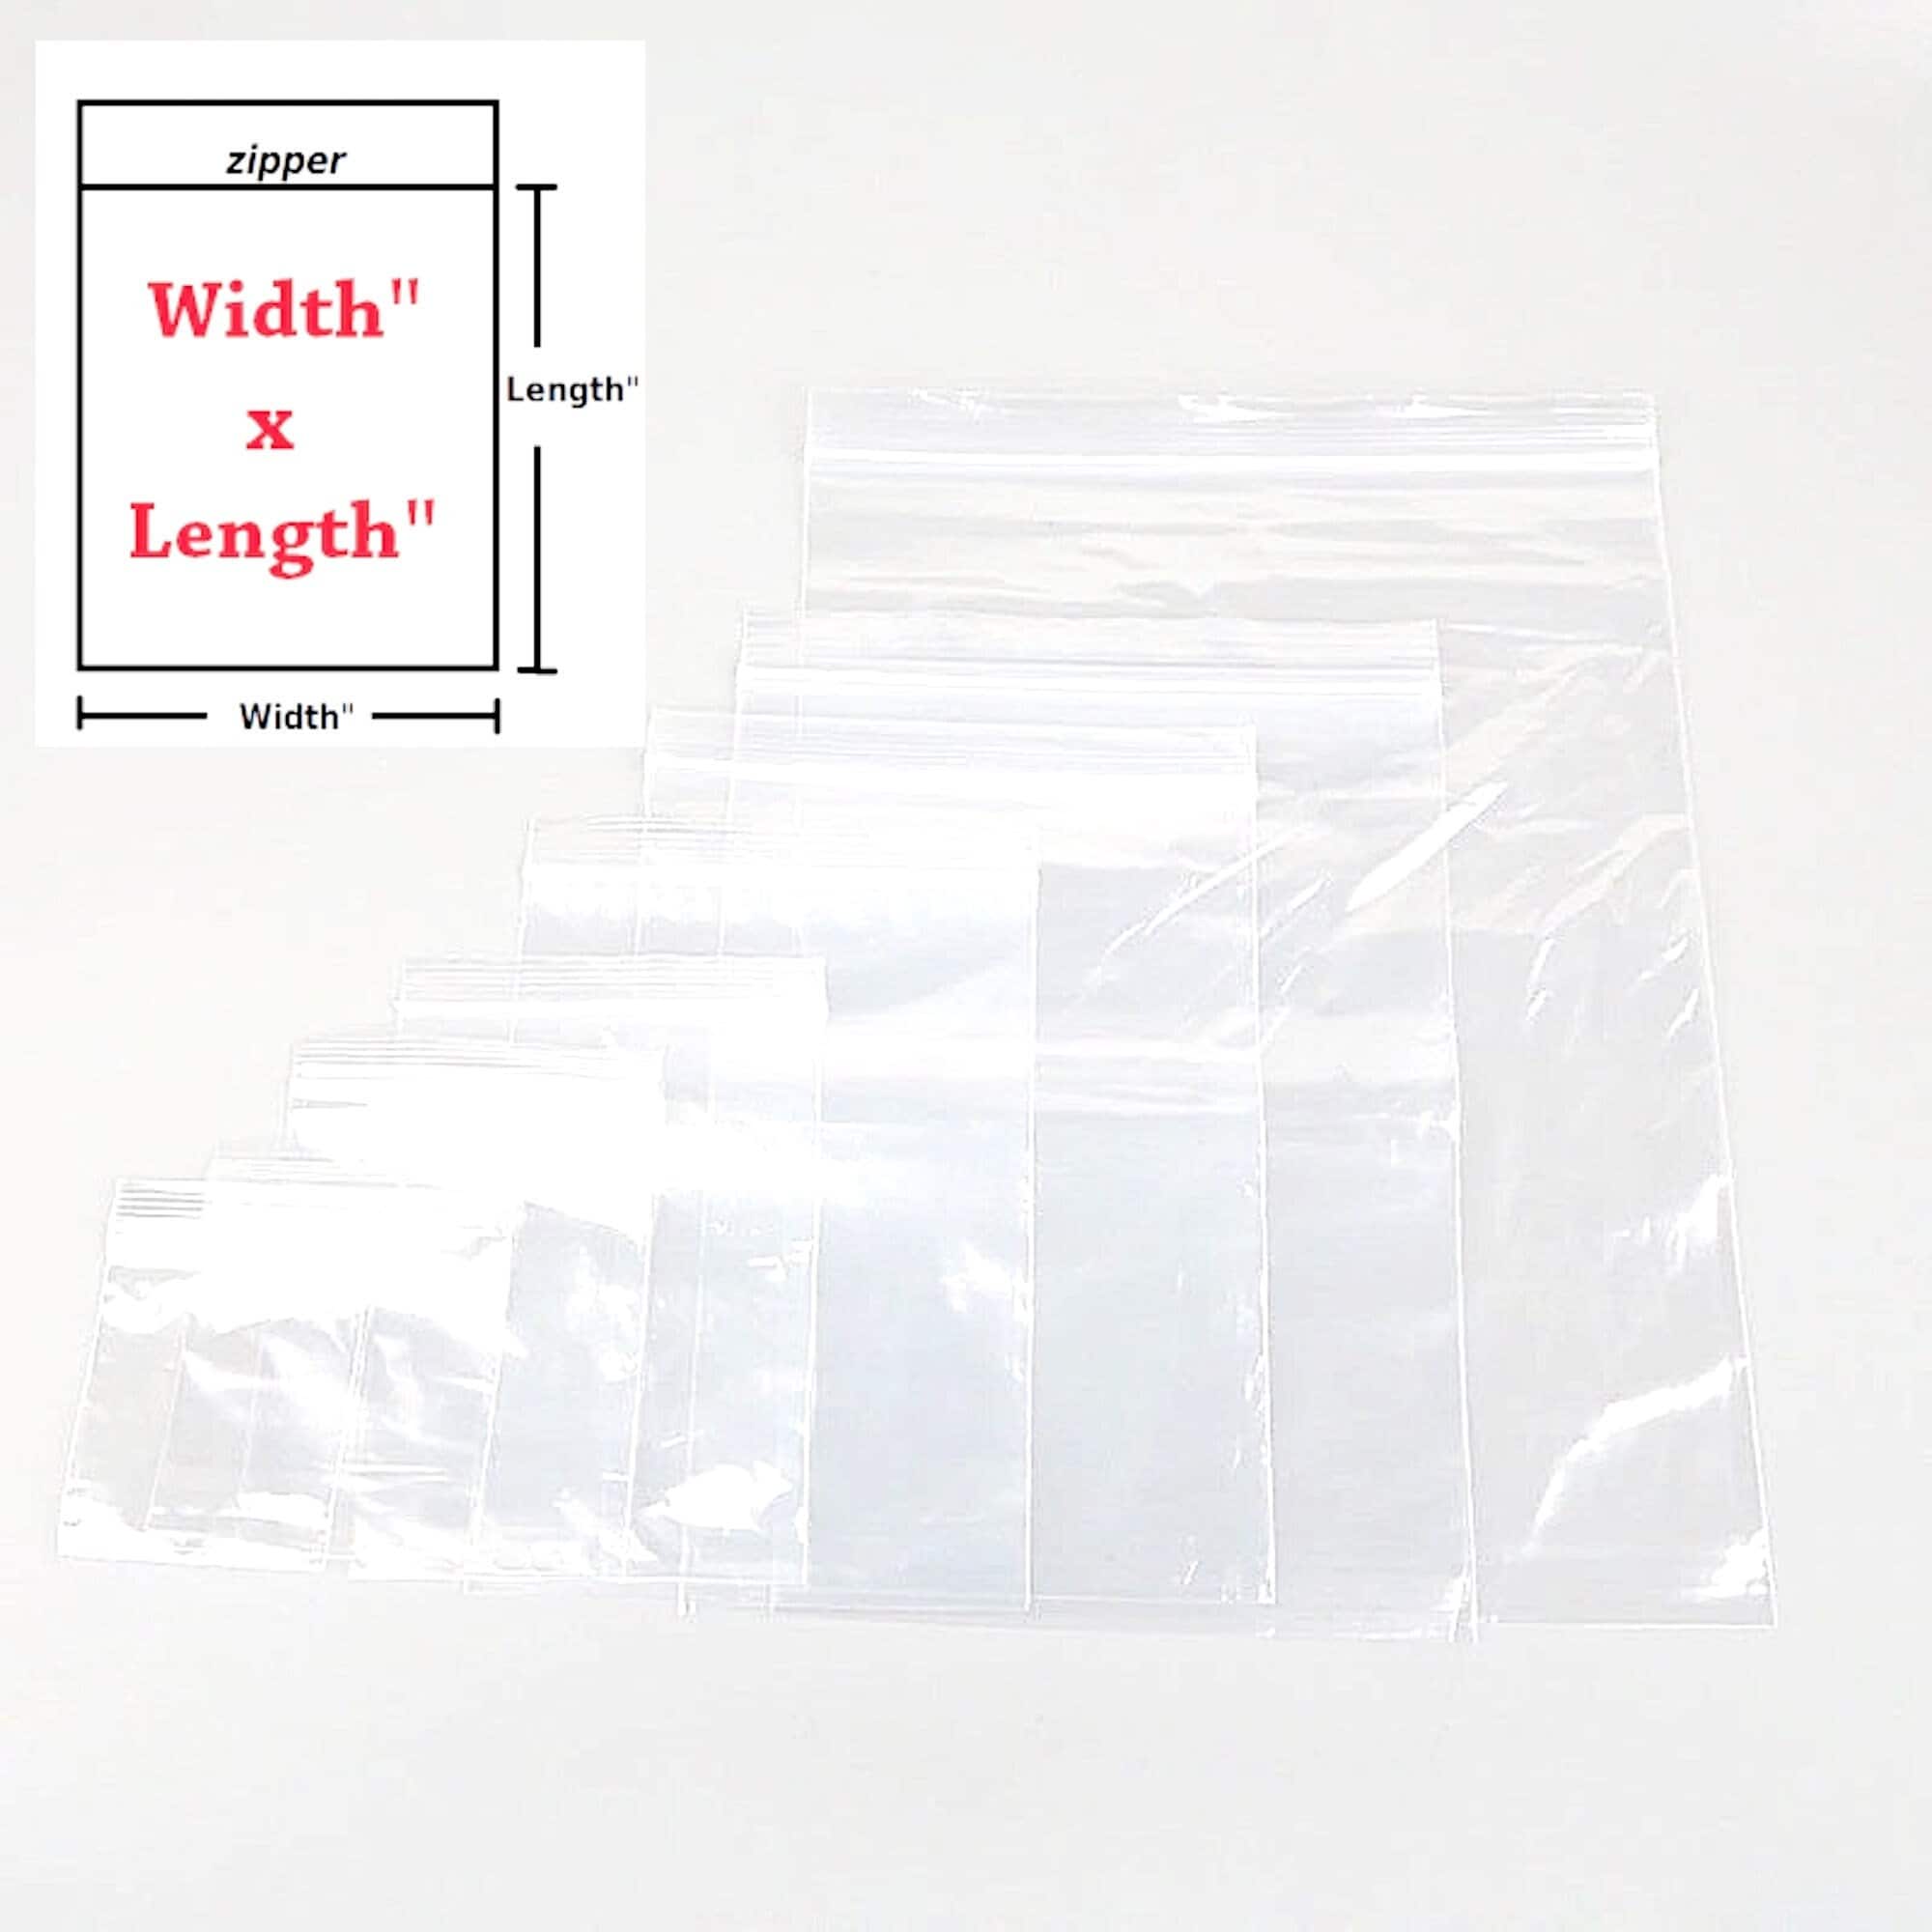 1.5 x 2 Resealable Zip Bags by Bead Landing in Clear | Michaels